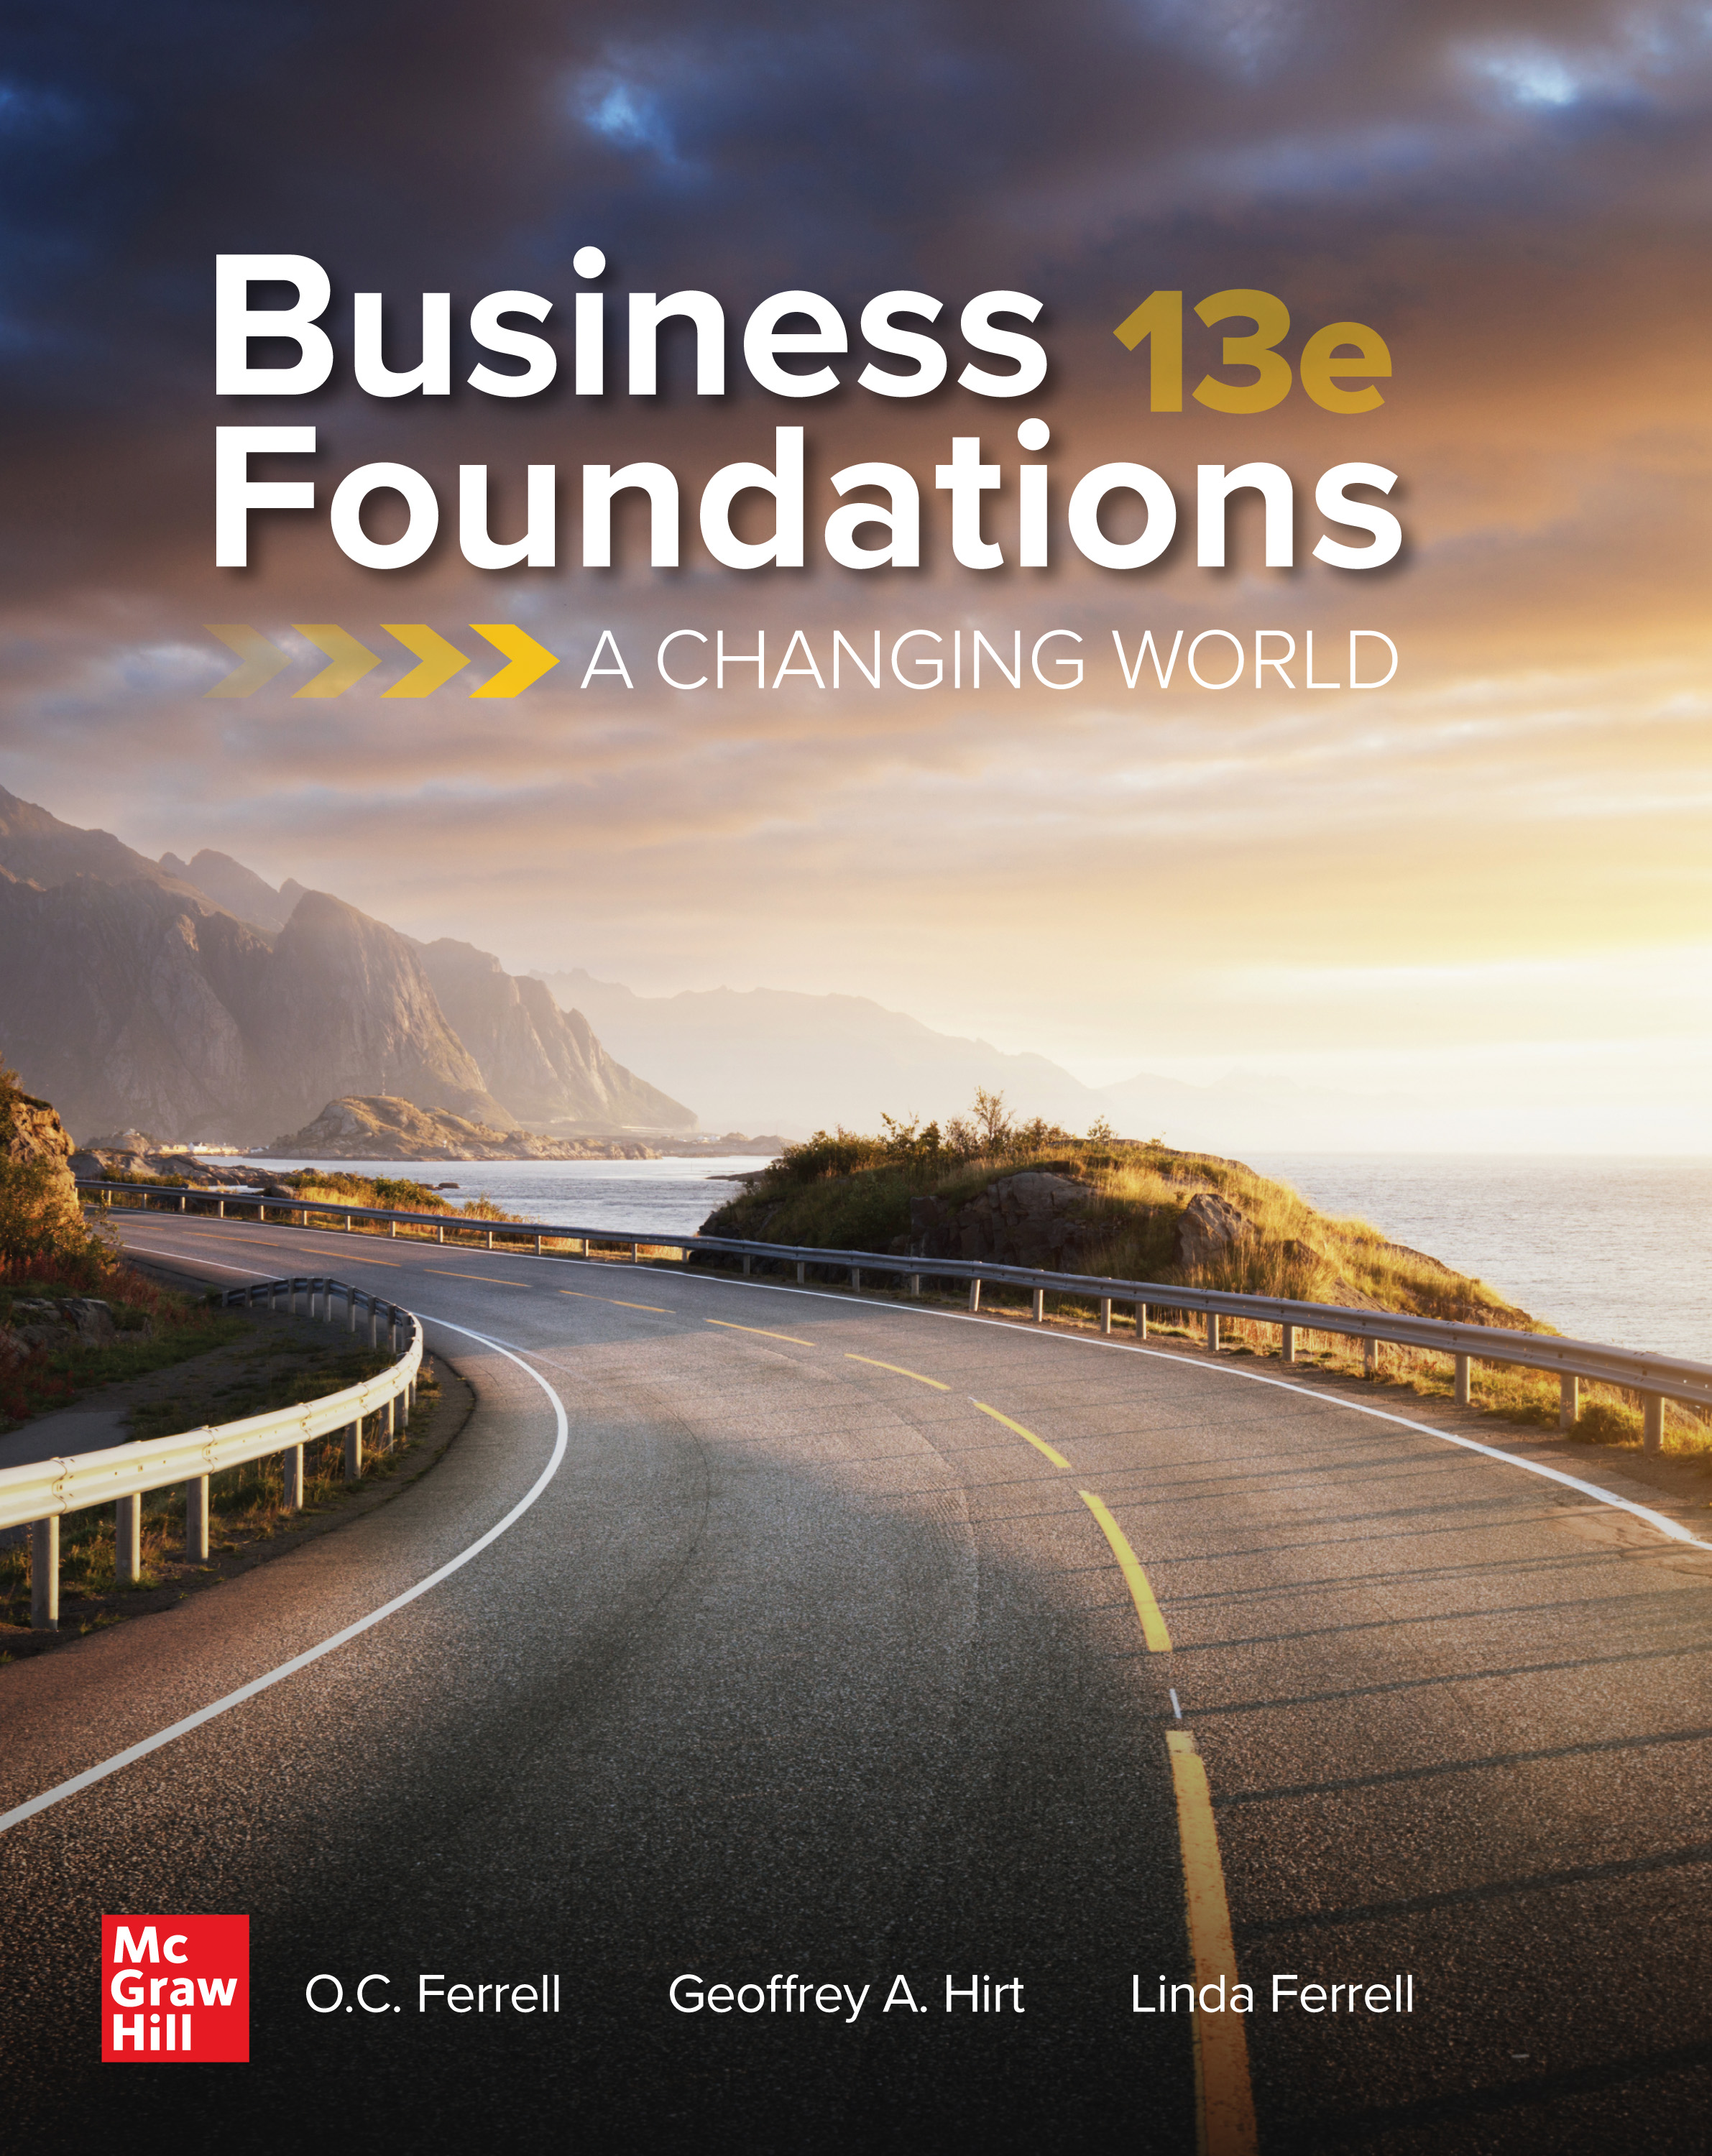 Business Foundations